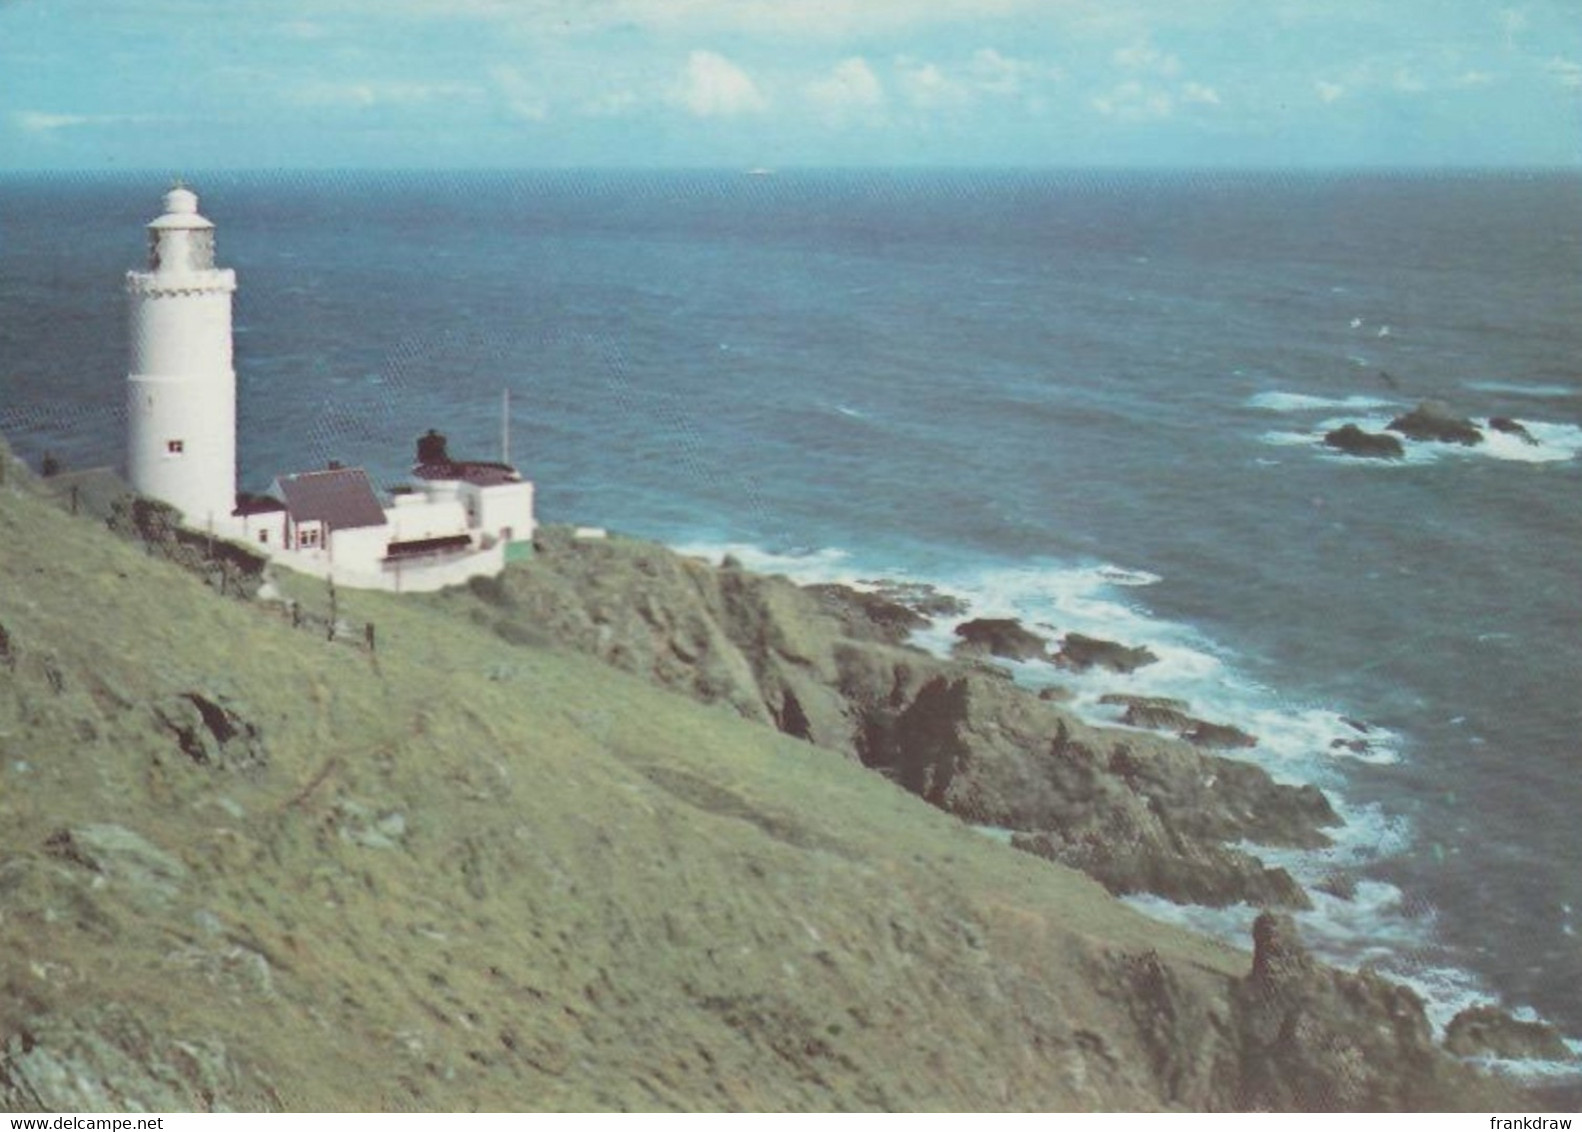 Postcard - Start Point Lighthouse, Devon - Card No. PSD/86184 - Posted 30-05-1974 - VG - Unclassified